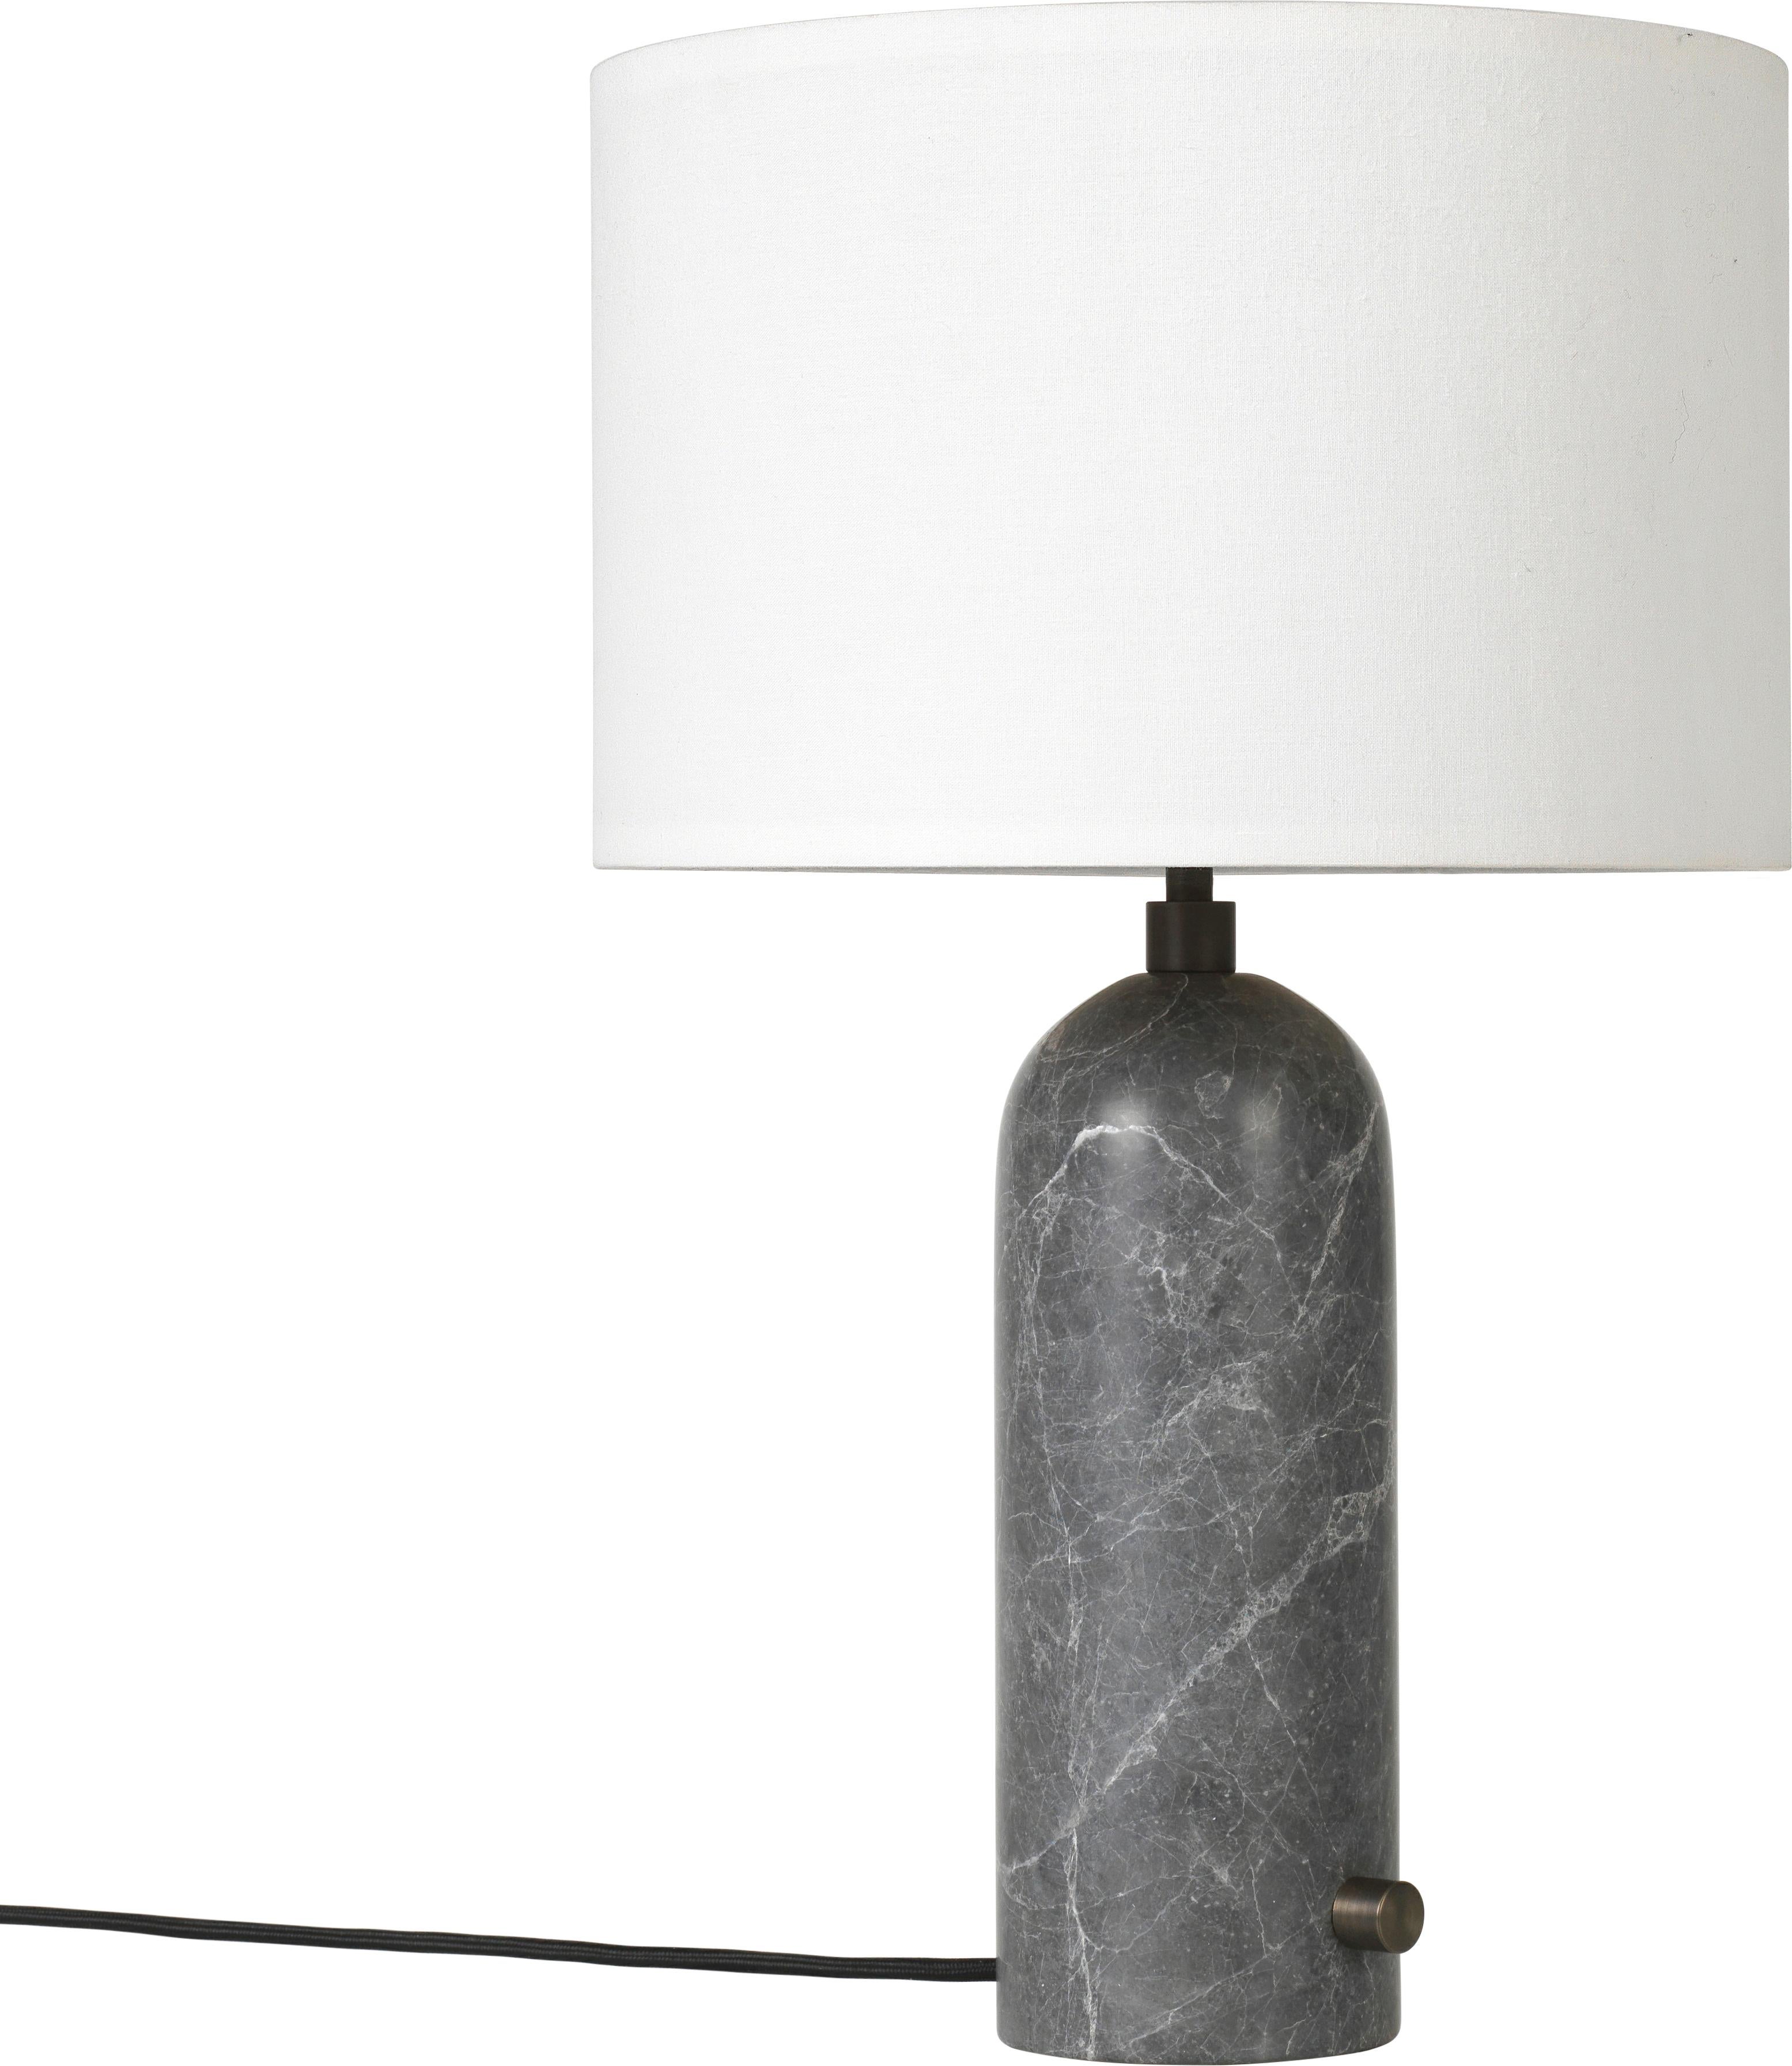 Large 'Gravity' Blackened Steel Table Lamp by Space Copenhagen for Gubi For Sale 5